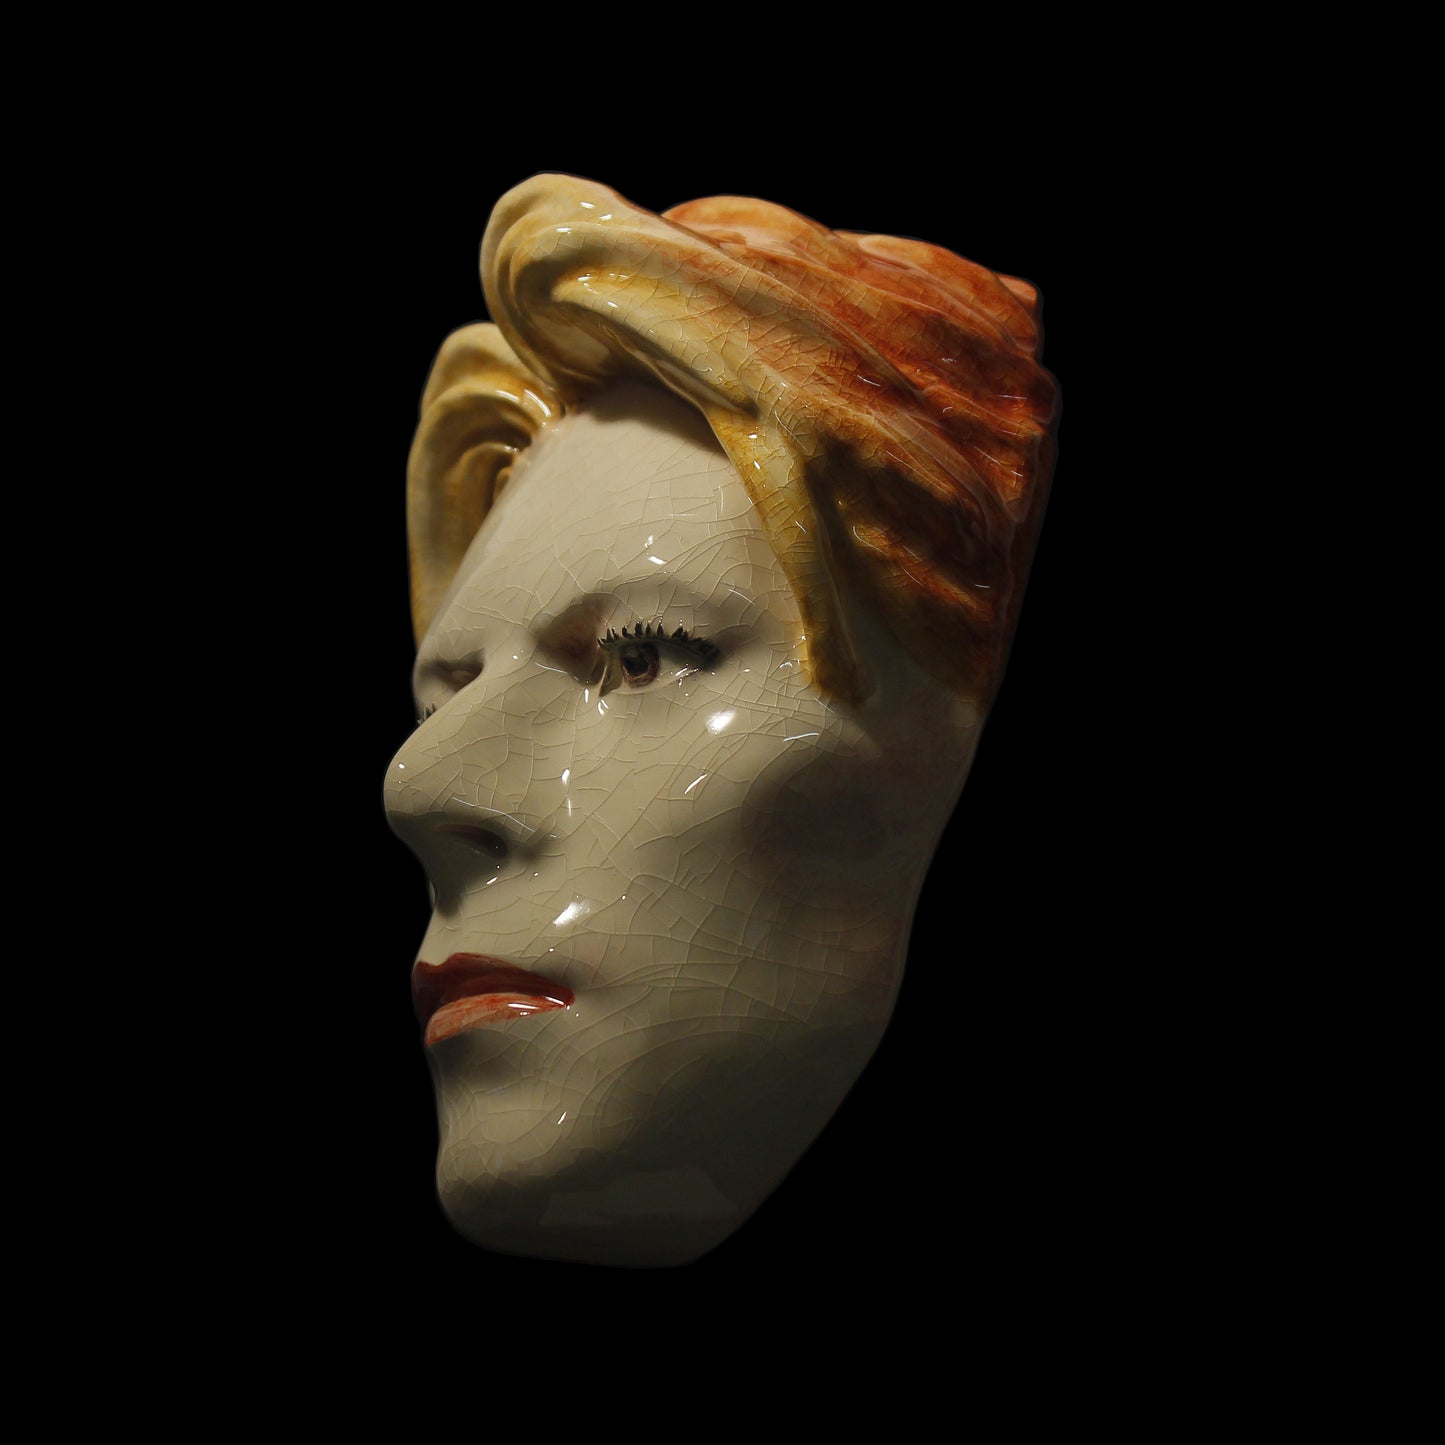 David Bowie - The Man Who Fell To Earth Mask